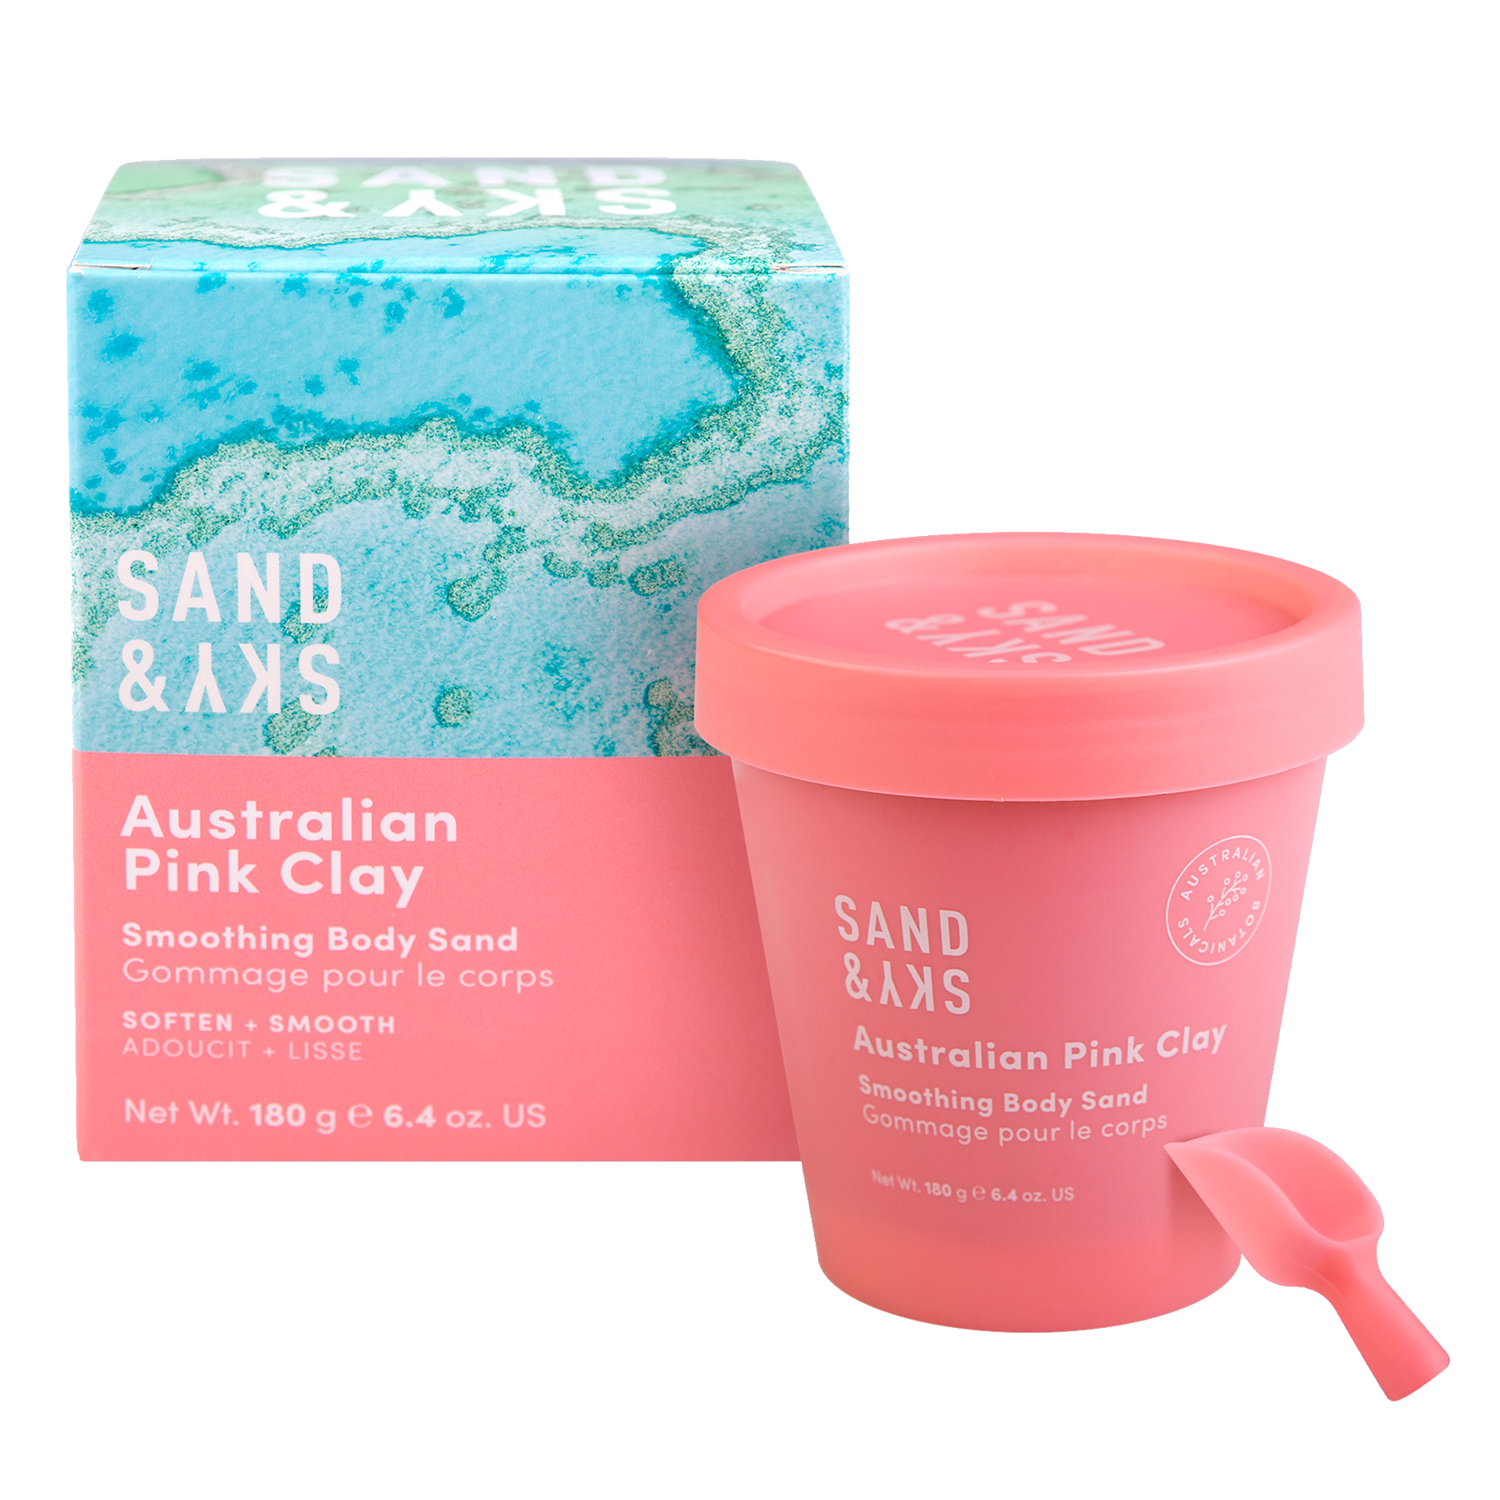 Sand & Sky Australian Pink Clay - Smoothing Body Sand  1